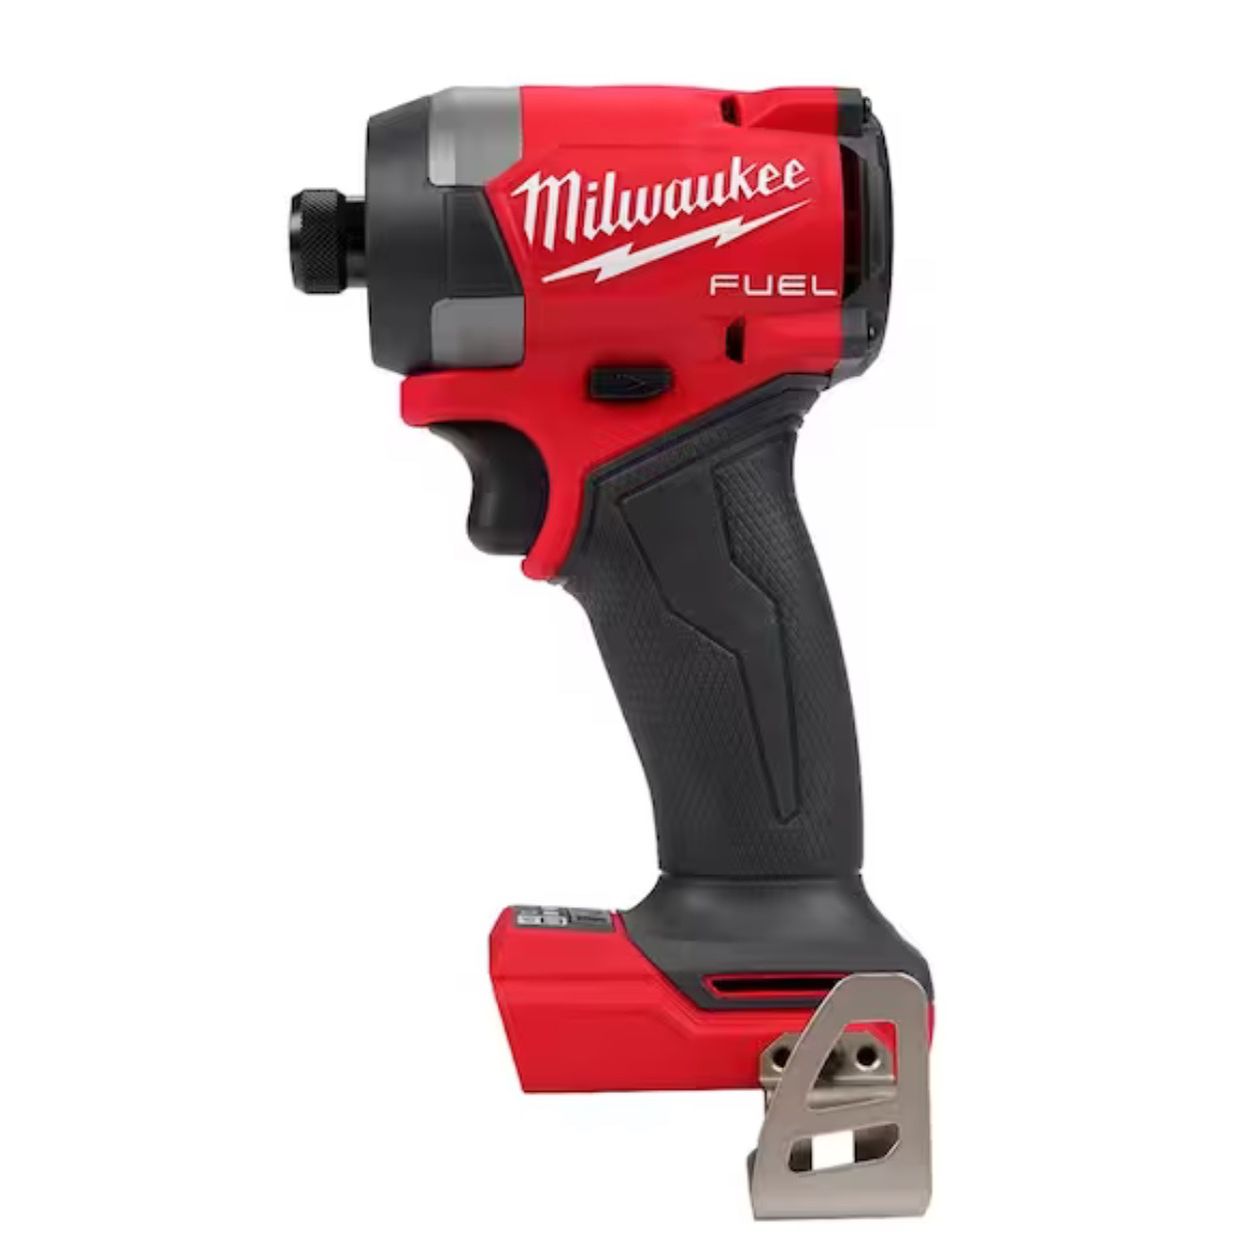 Mikwaukee M18 Fuel 2953-20 1/4” Hex Impact Driver (Tool Only)